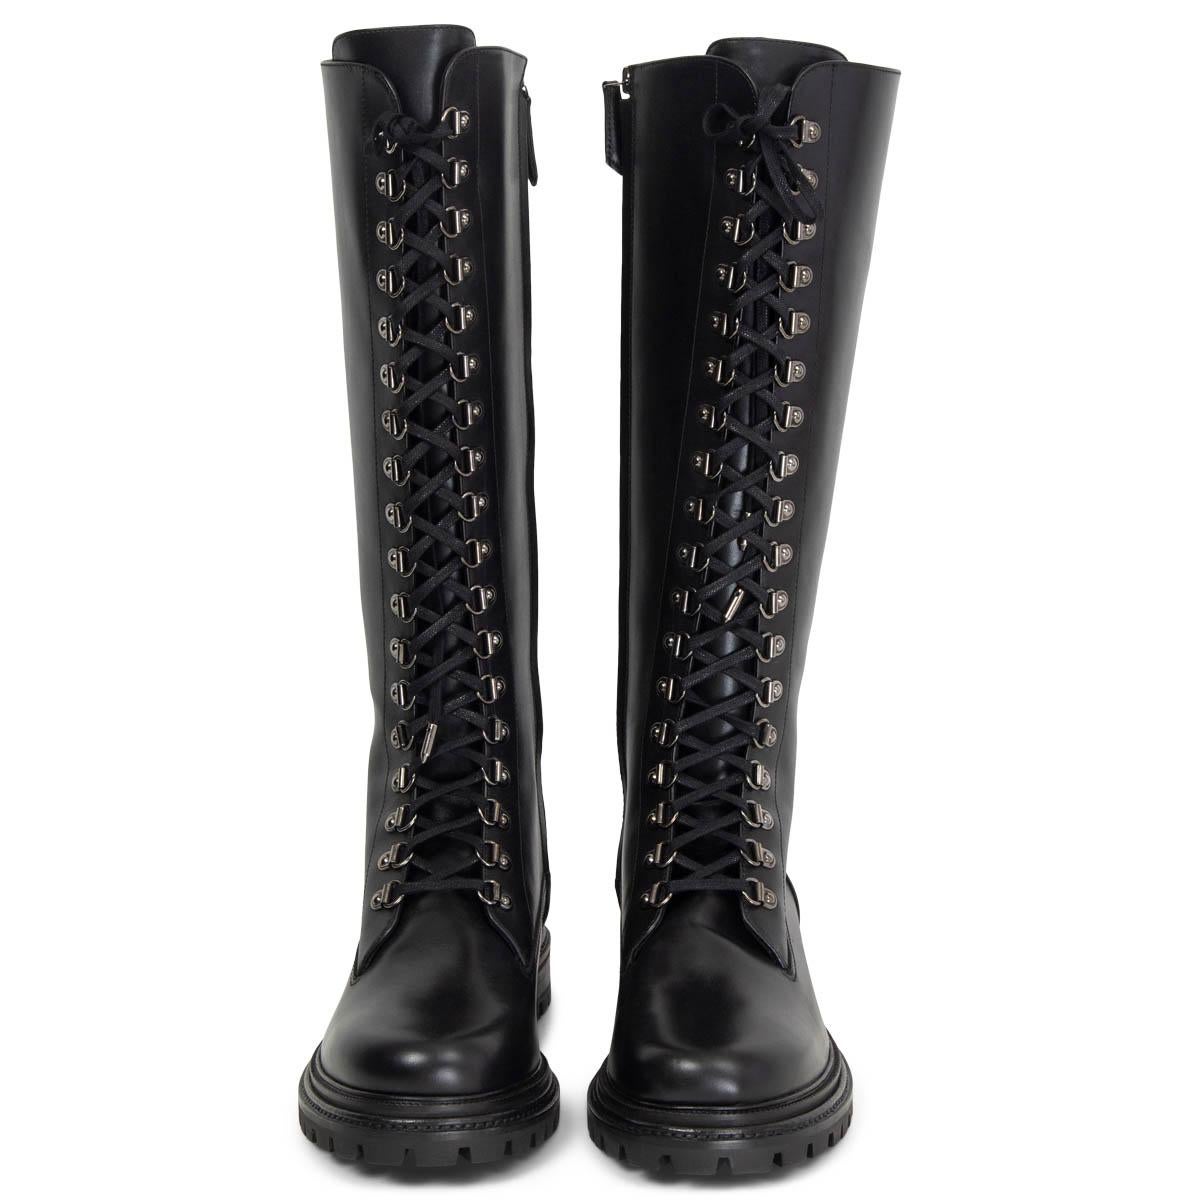 100% authentic Aquazzura lace-up knee high combat boots in black smooth calfskin and gunmetal hardware. Open with a zipper on the inside and come with a chunky black rubber sole. Brand new. 

Measurements
Imprinted Size	38.5
Shoe Size	38.5
Inside